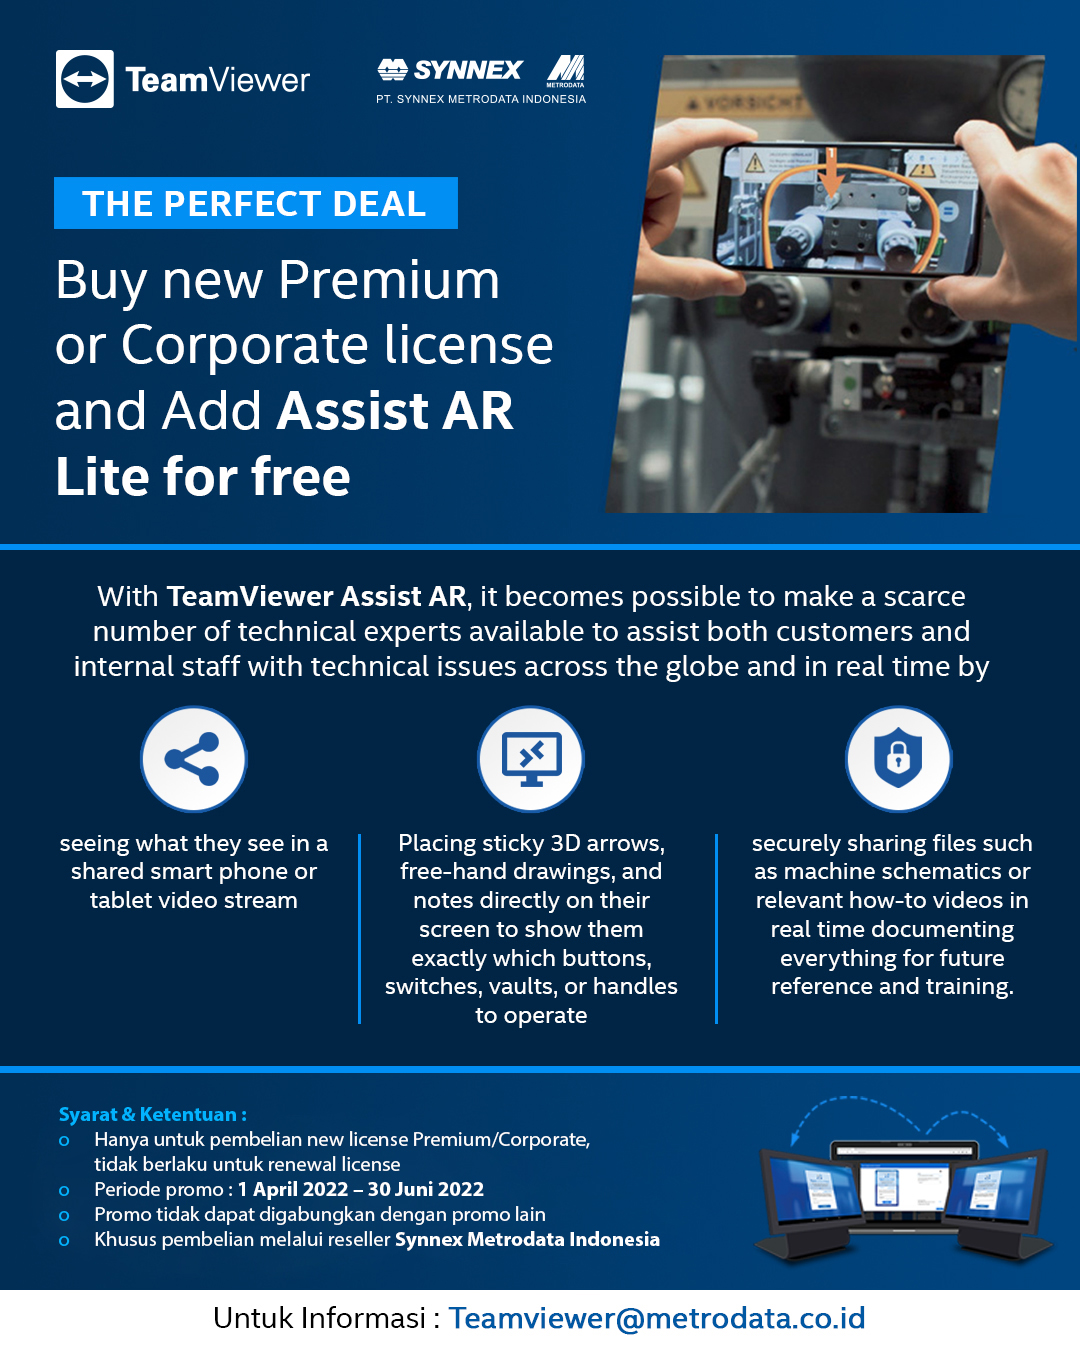 TeamViewer : Buy New Premium or Corporate License and Add Assist AR Lite for Free